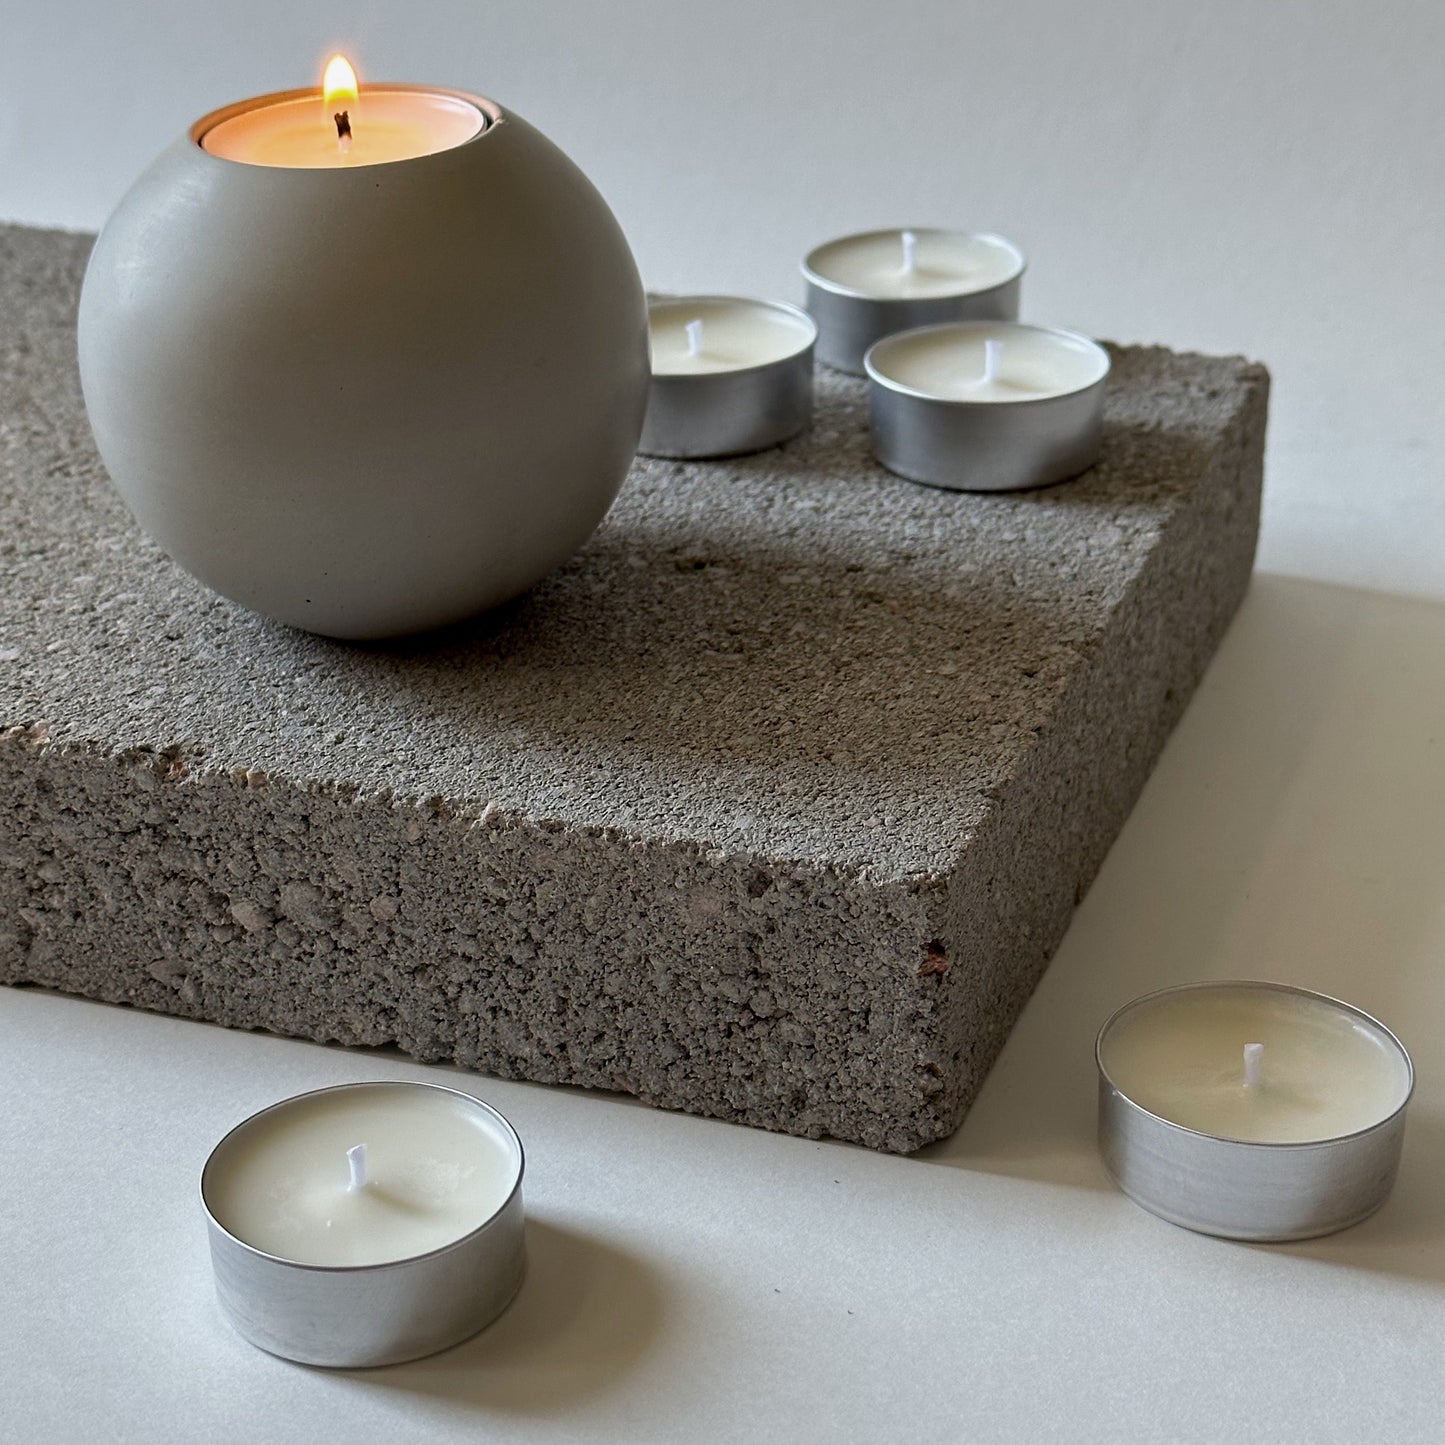 Tea Light Discovery Set | Summer Collection Edit: 1 2023